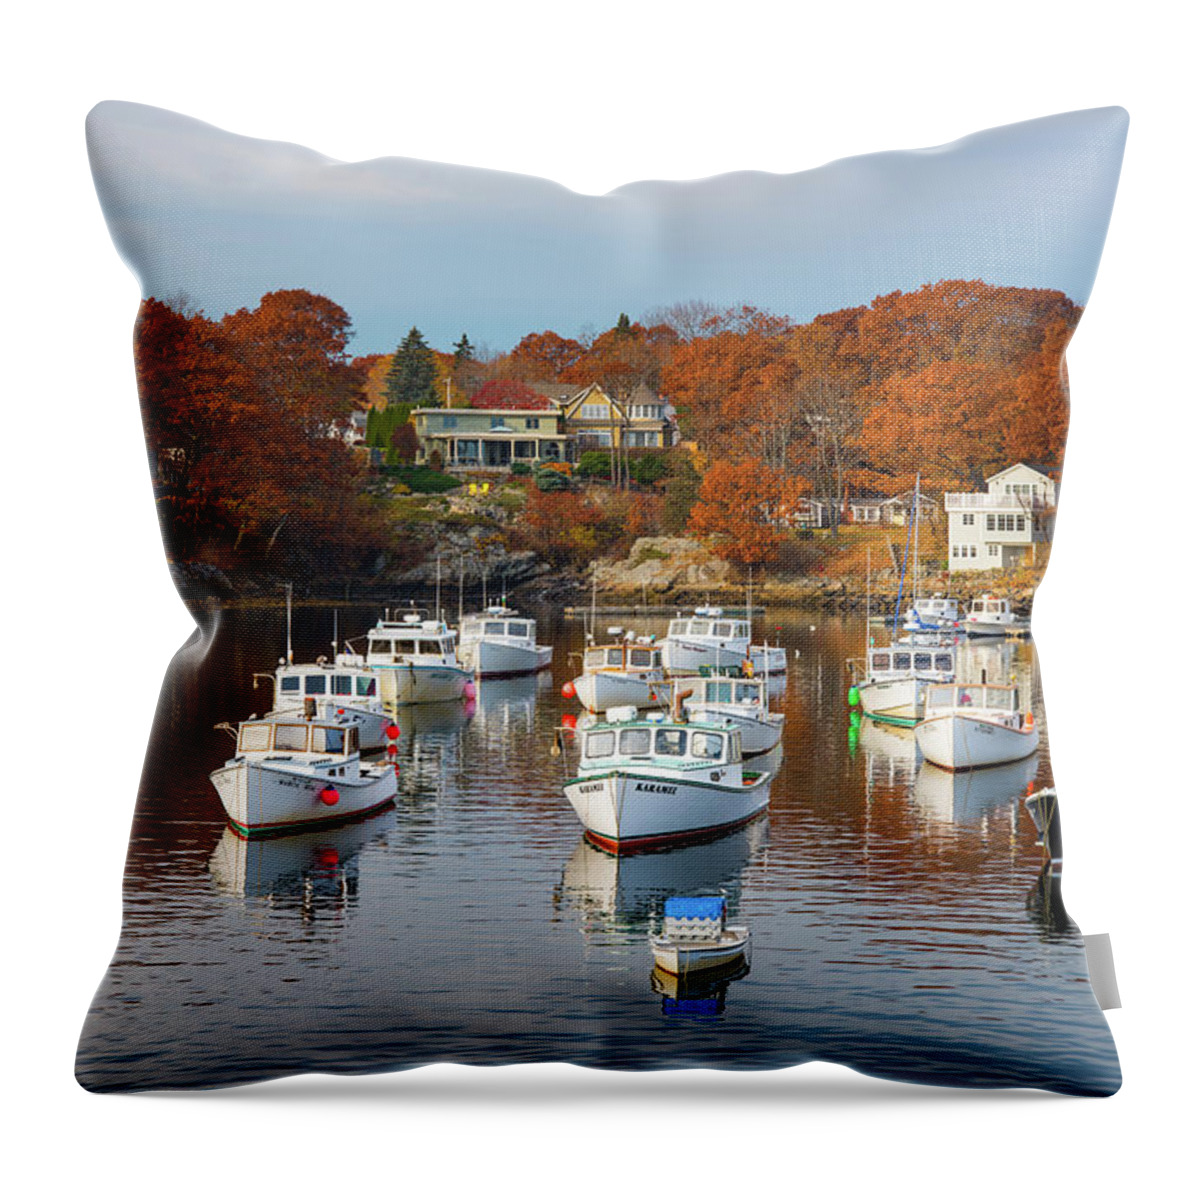 Perkins Cove Throw Pillow featuring the photograph Perkins Cove by Darren White